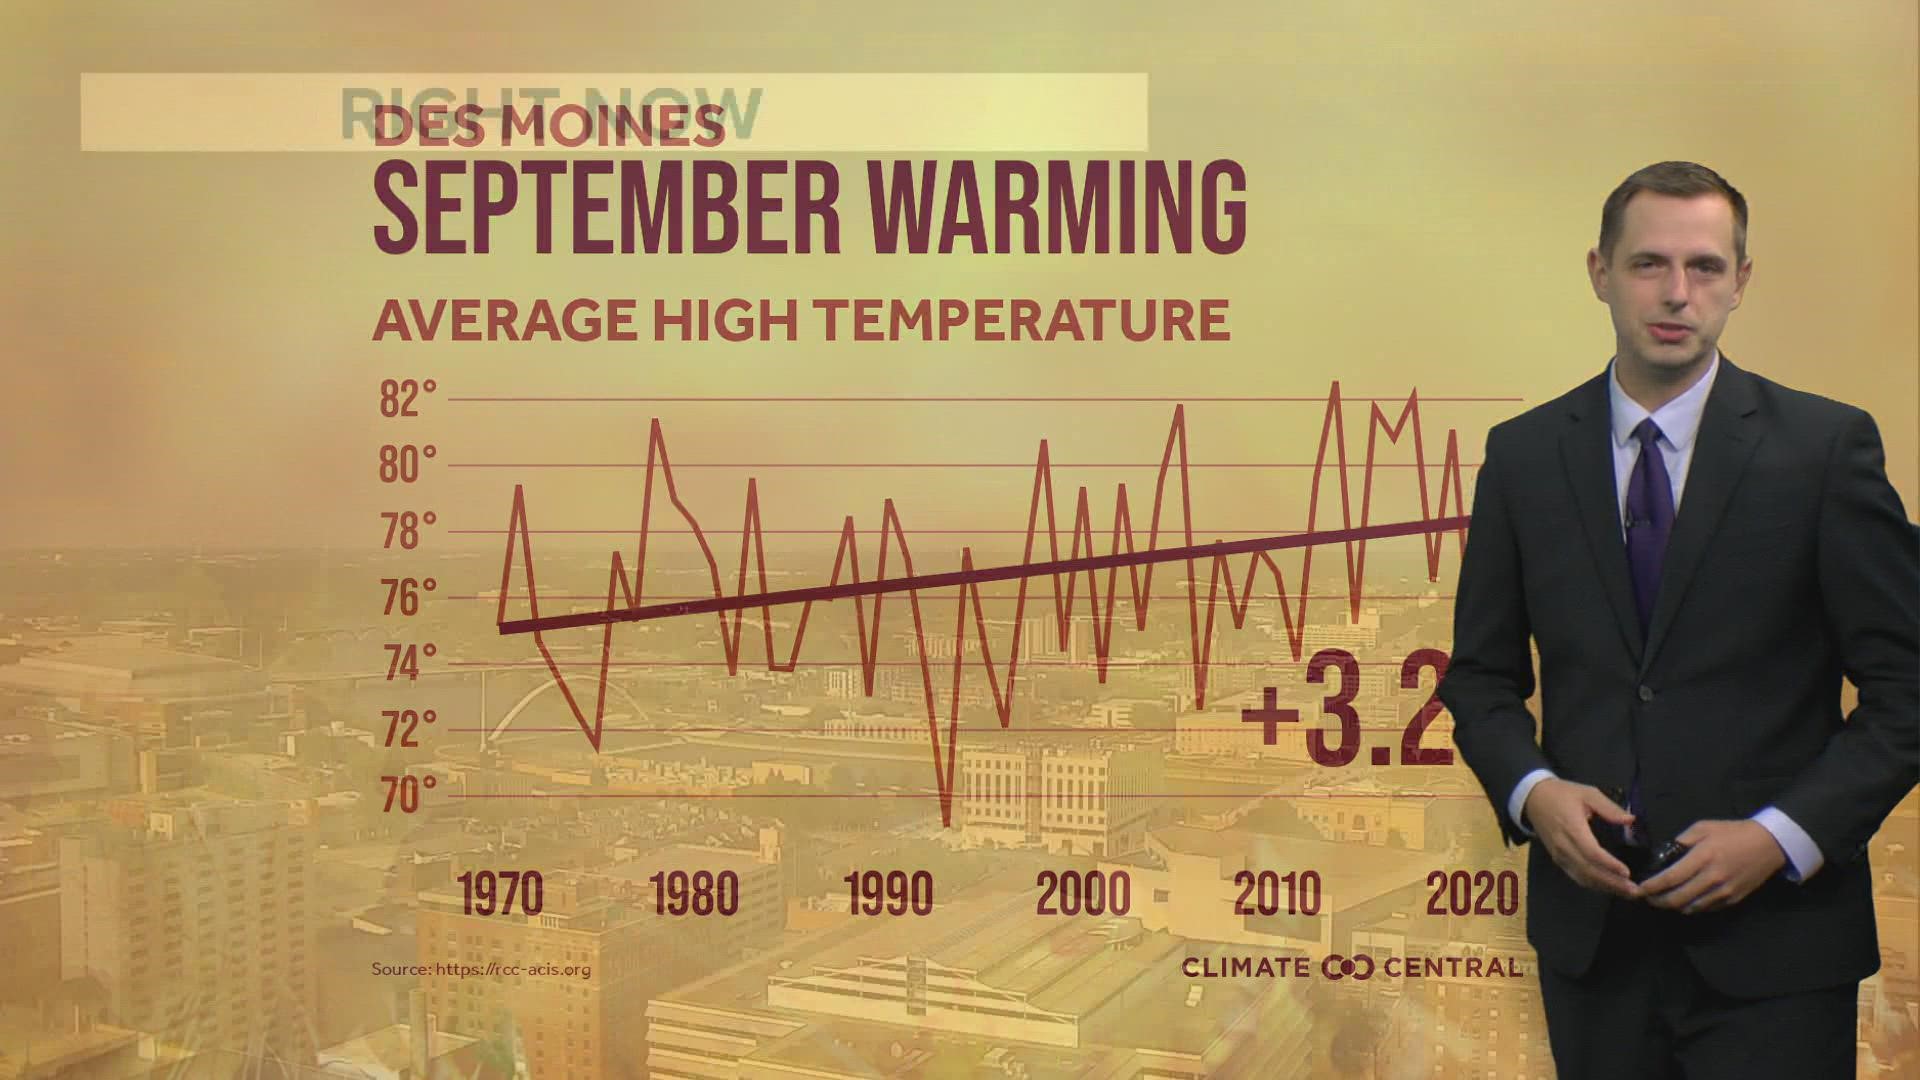 September is quickly warming, with the average high temperature up 3.2°F since 1970.